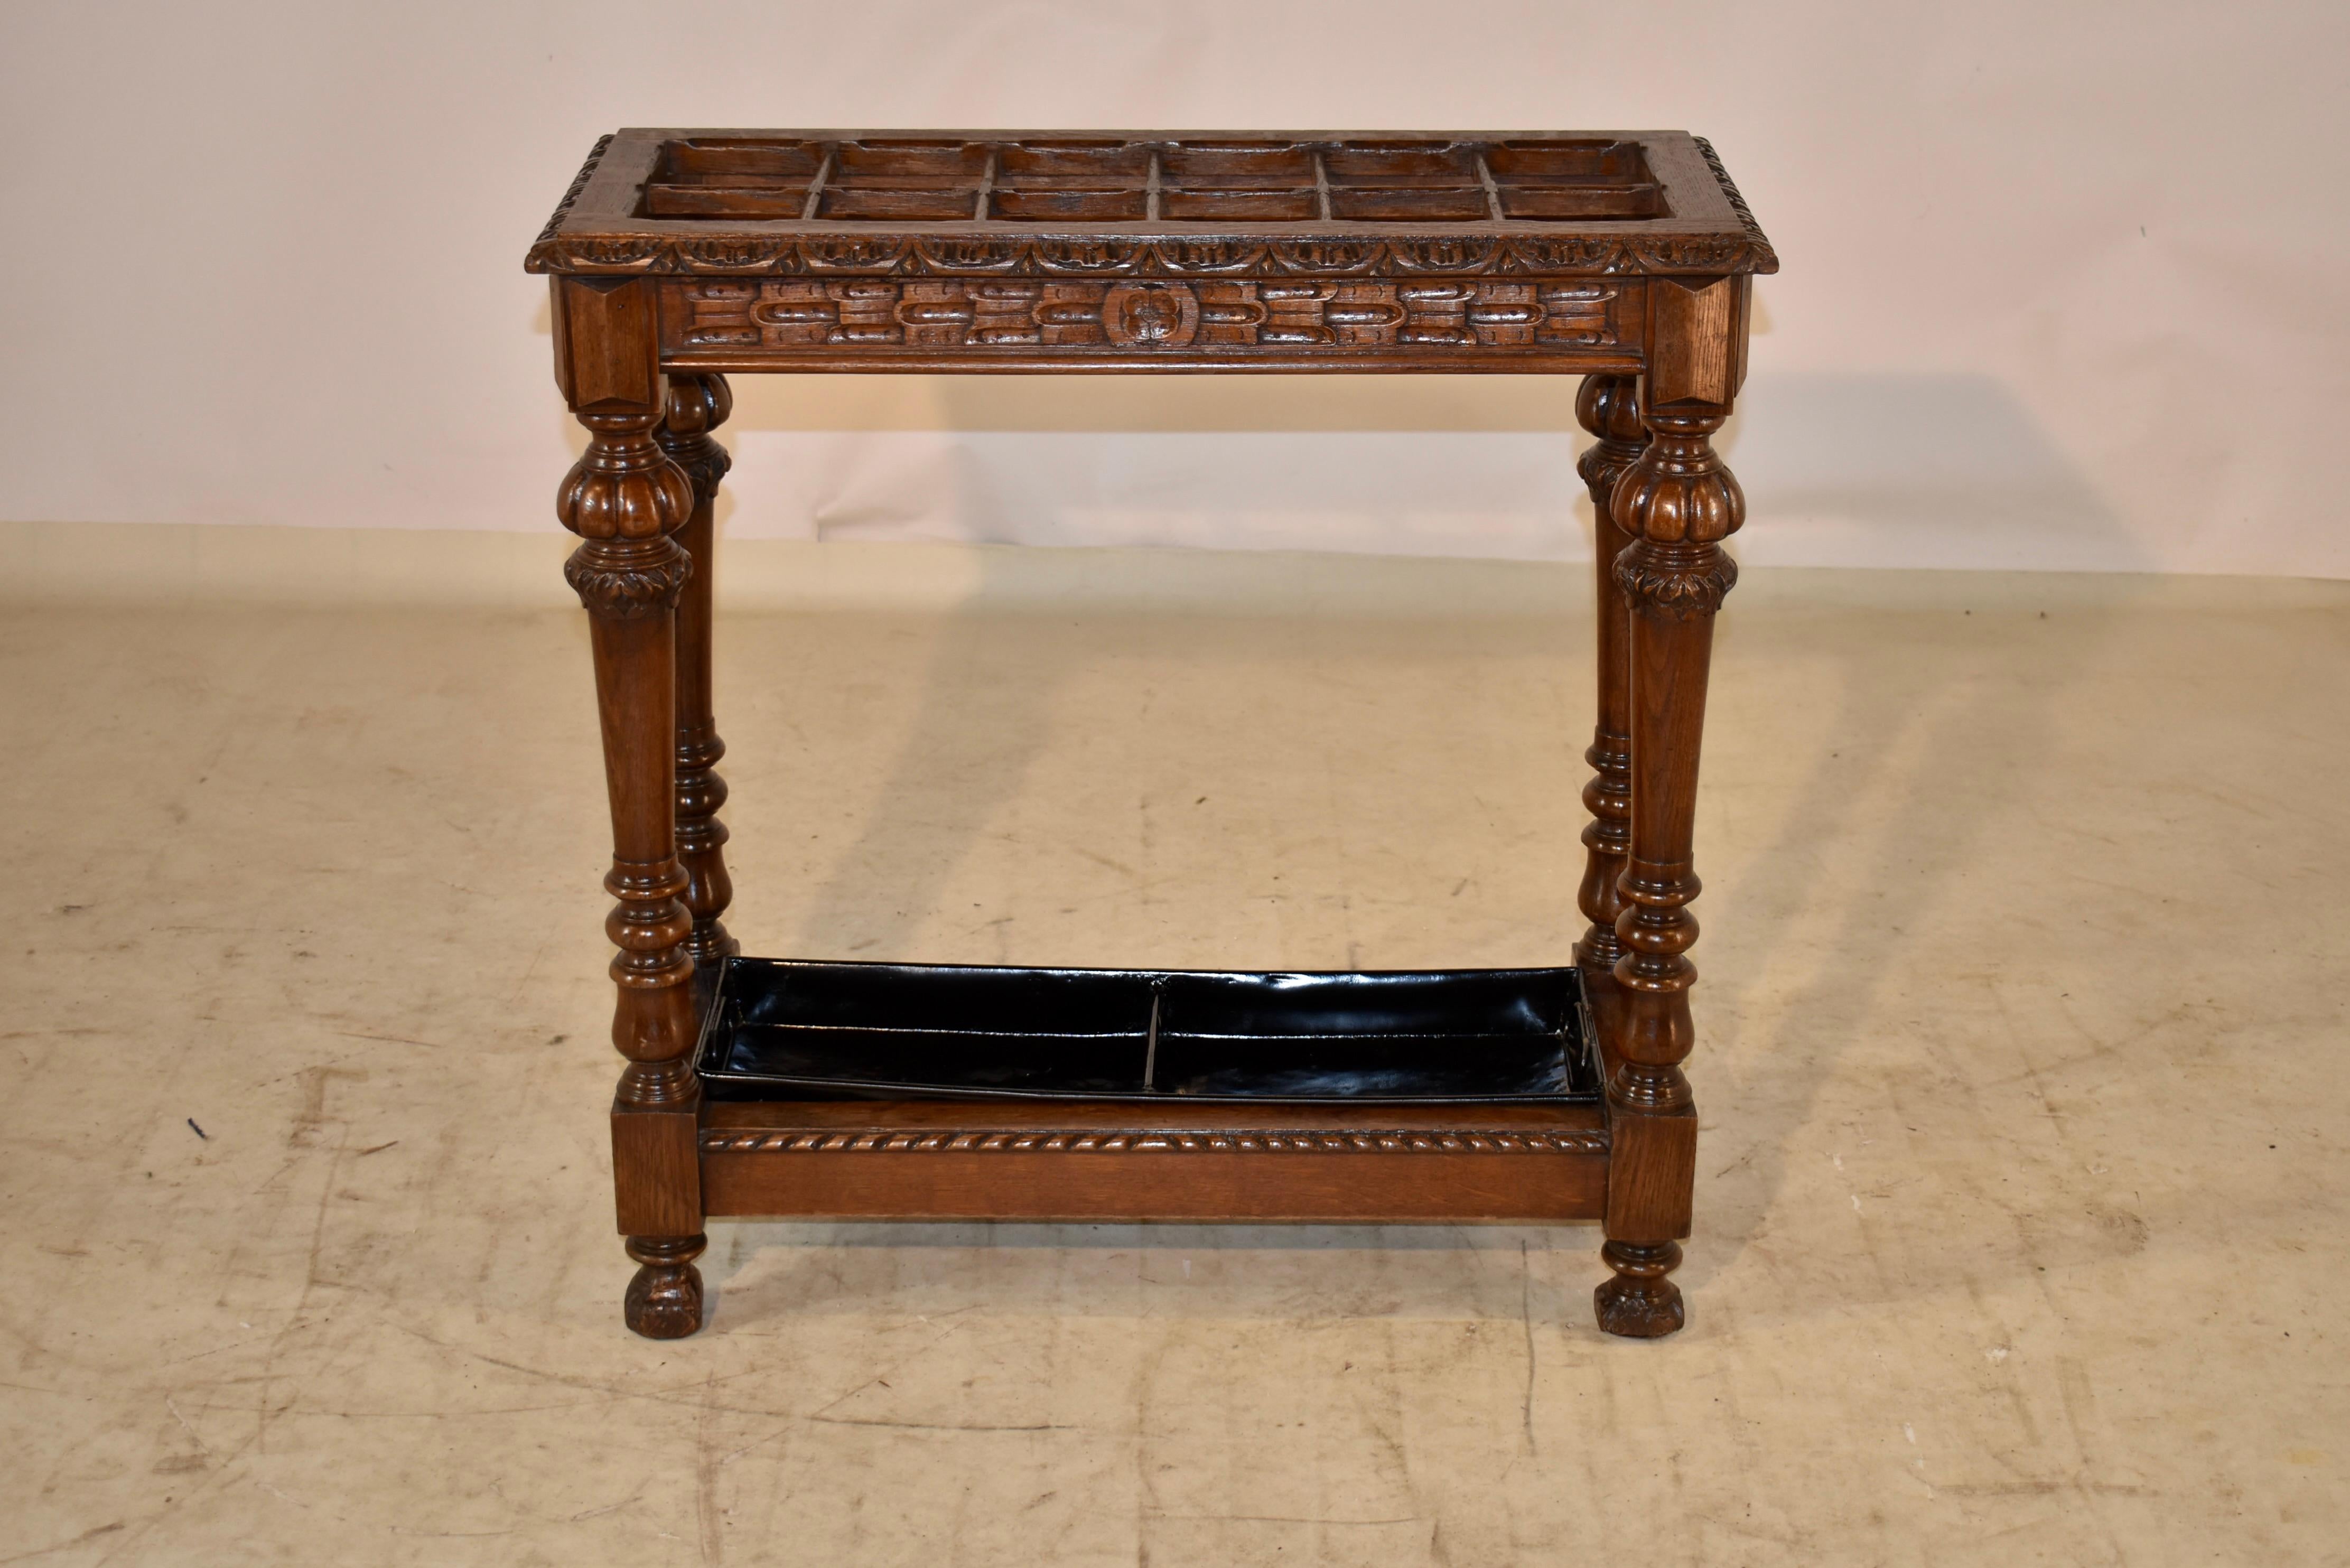 19th century oak umbrella stand from France with a beveled and carved decorated edge around the top, surrounding twelve sections for umbrellas or canes. The apron is wonderfully carved decorated as well and the piece is supported on hand turned